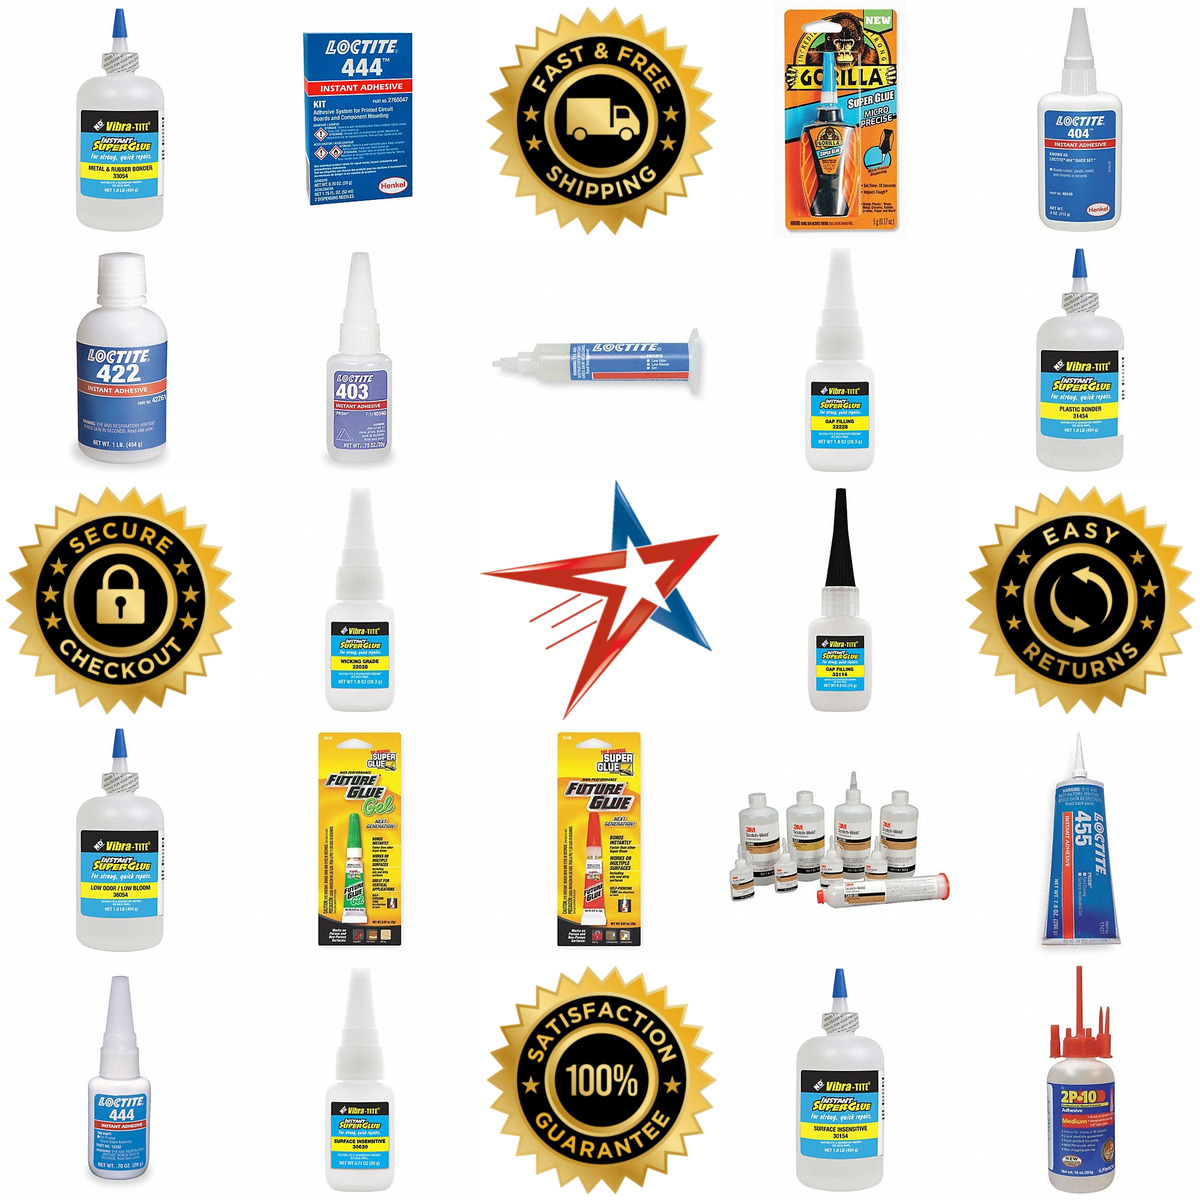 A selection of Instant Adhesives products on GoVets